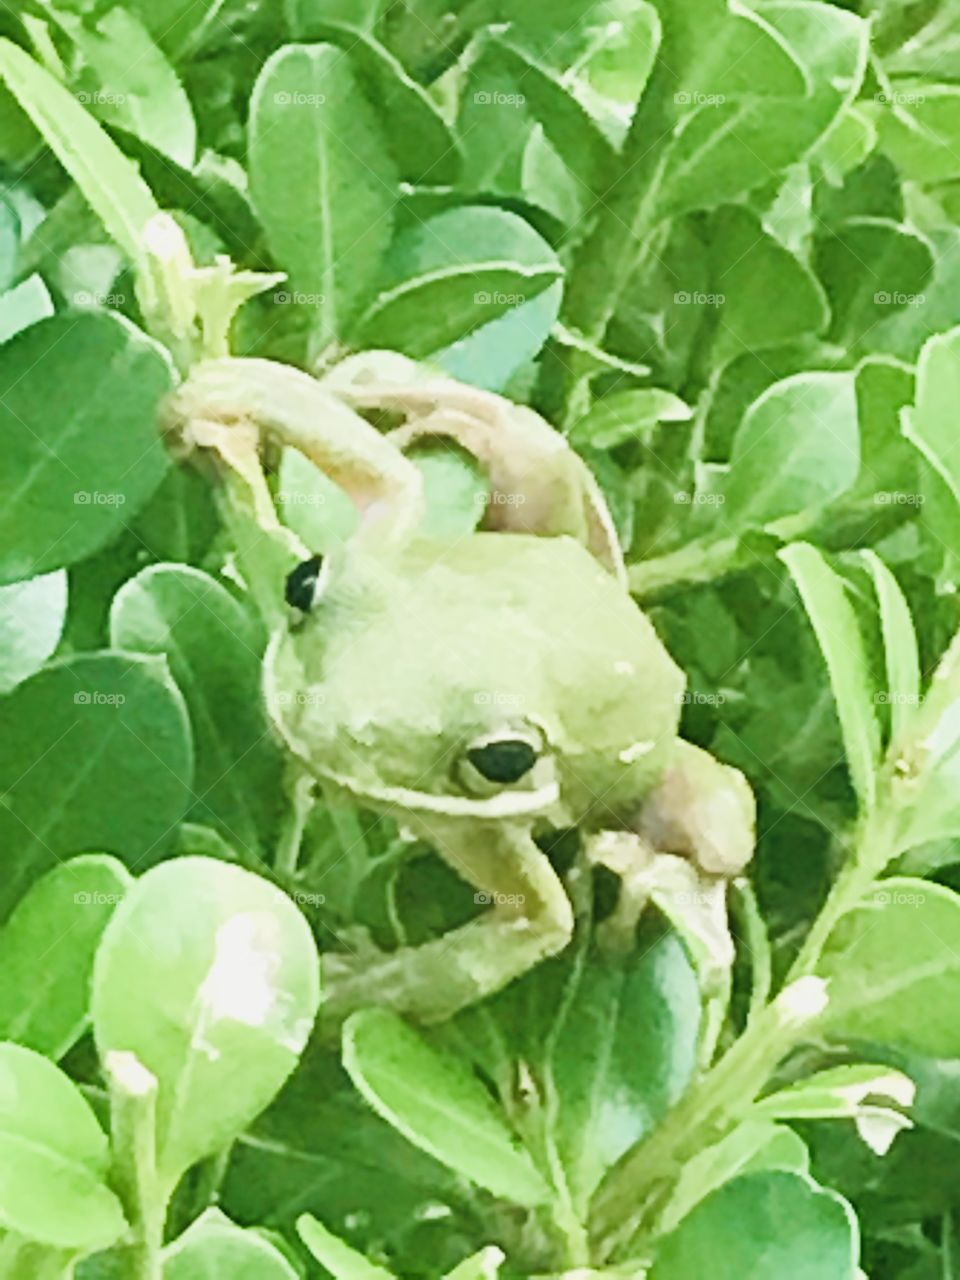 A well hidden frog is perfectly camouflaged in his green surroundings on this leafy bush. 